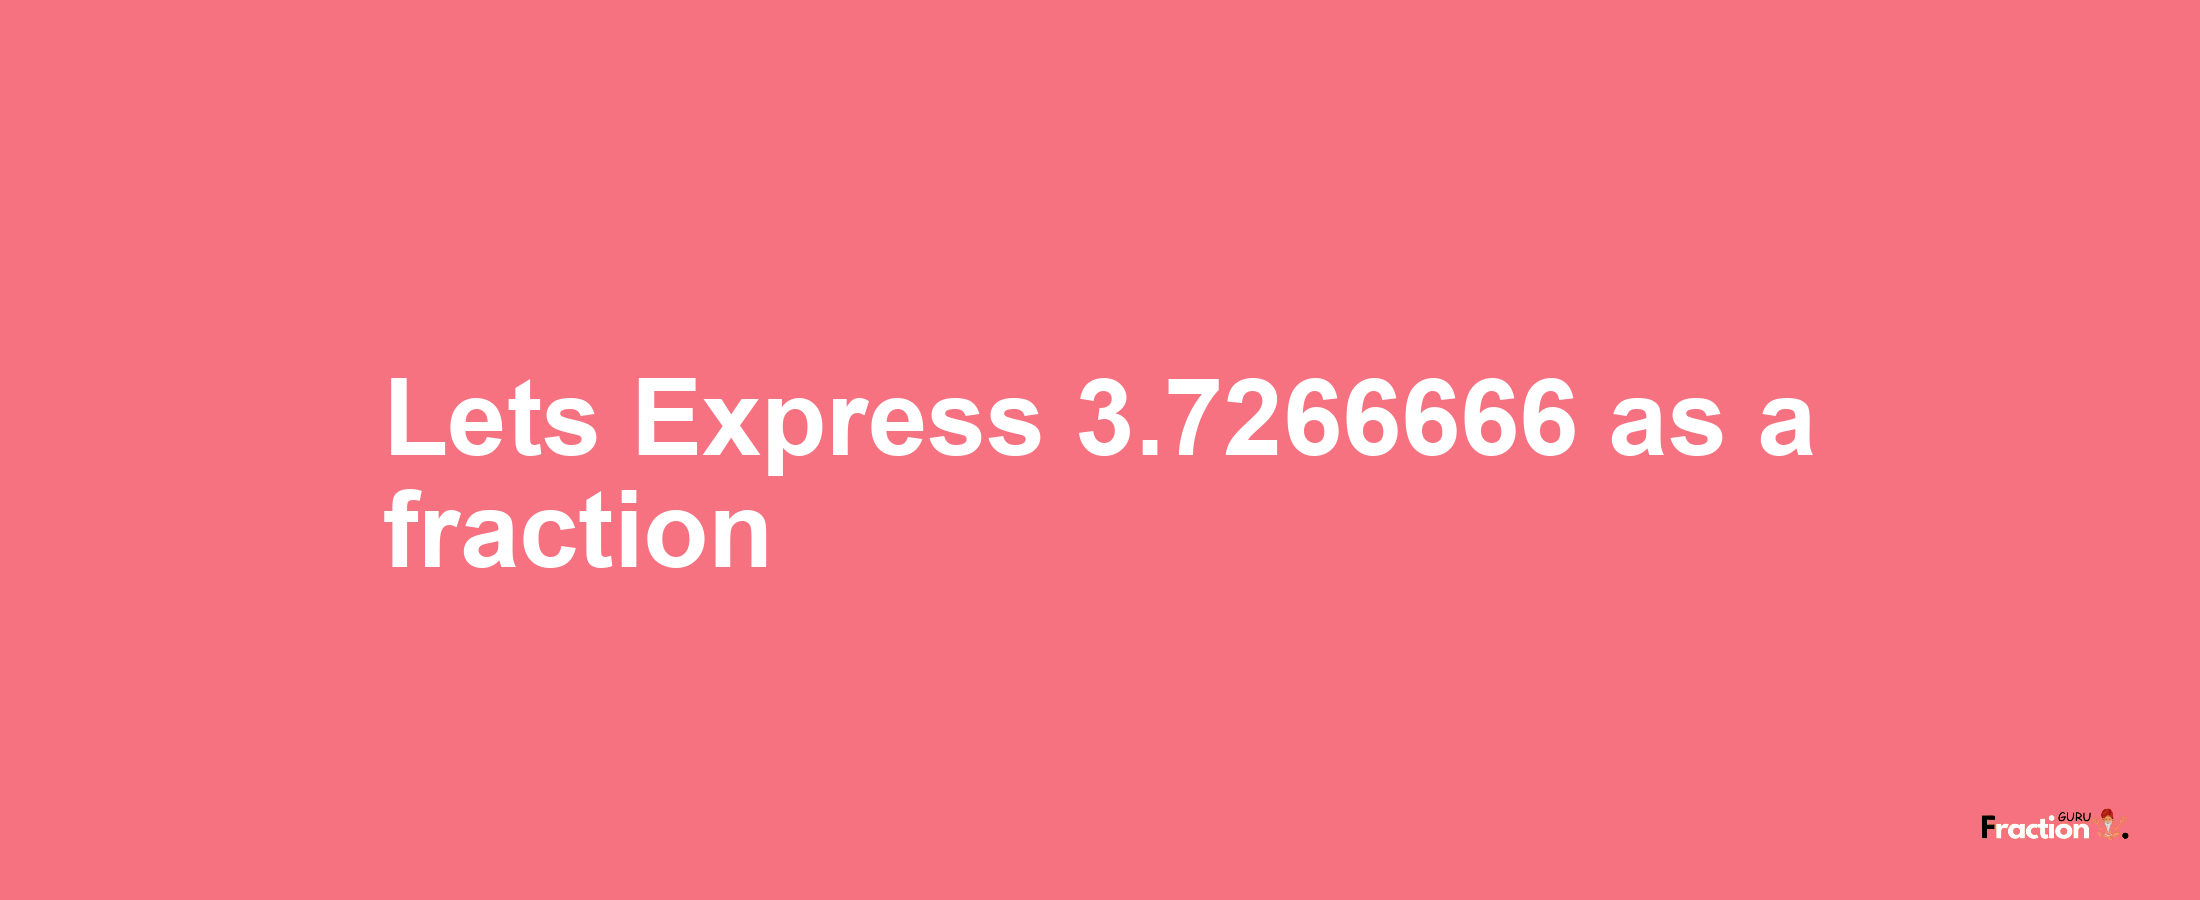 Lets Express 3.7266666 as afraction